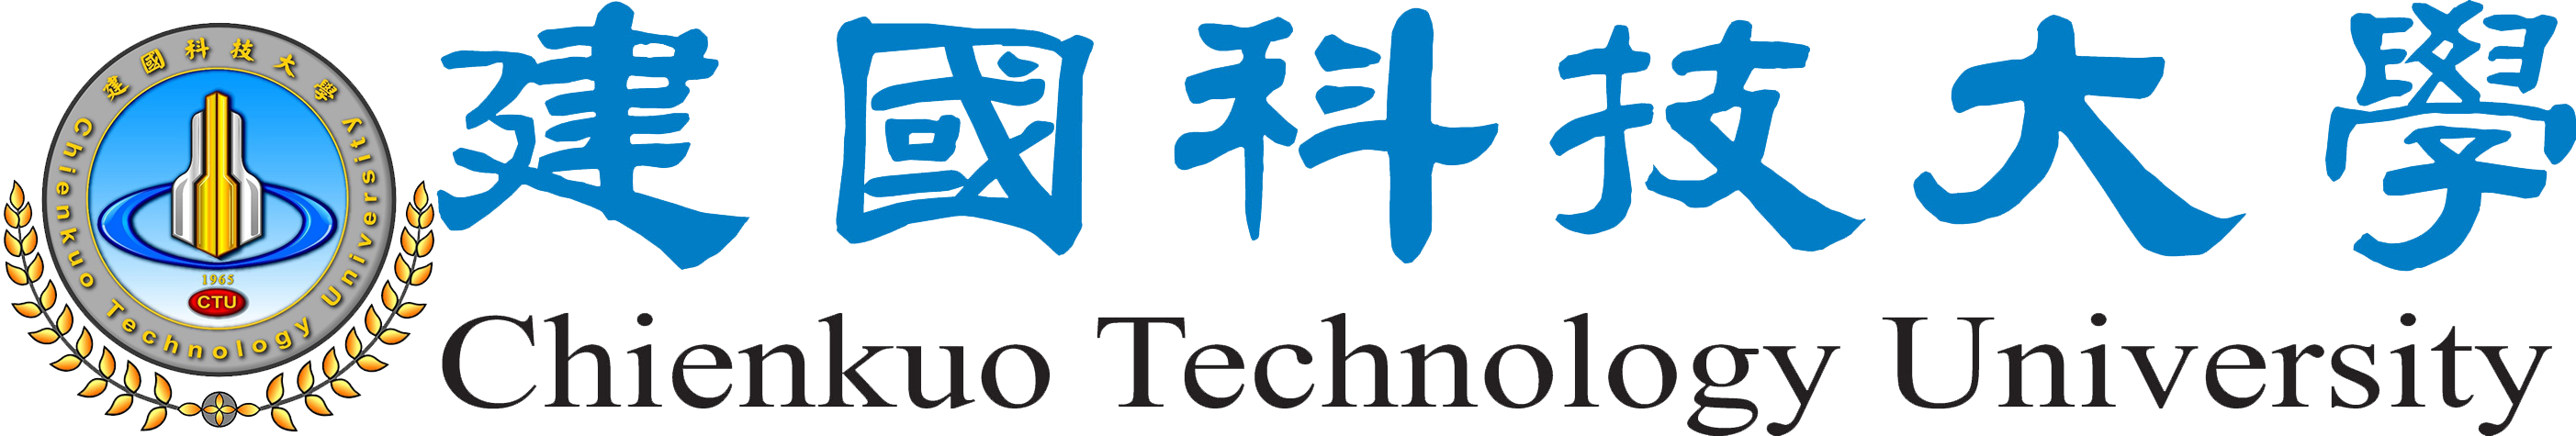 Chienkuo Technology University Logo and Banner